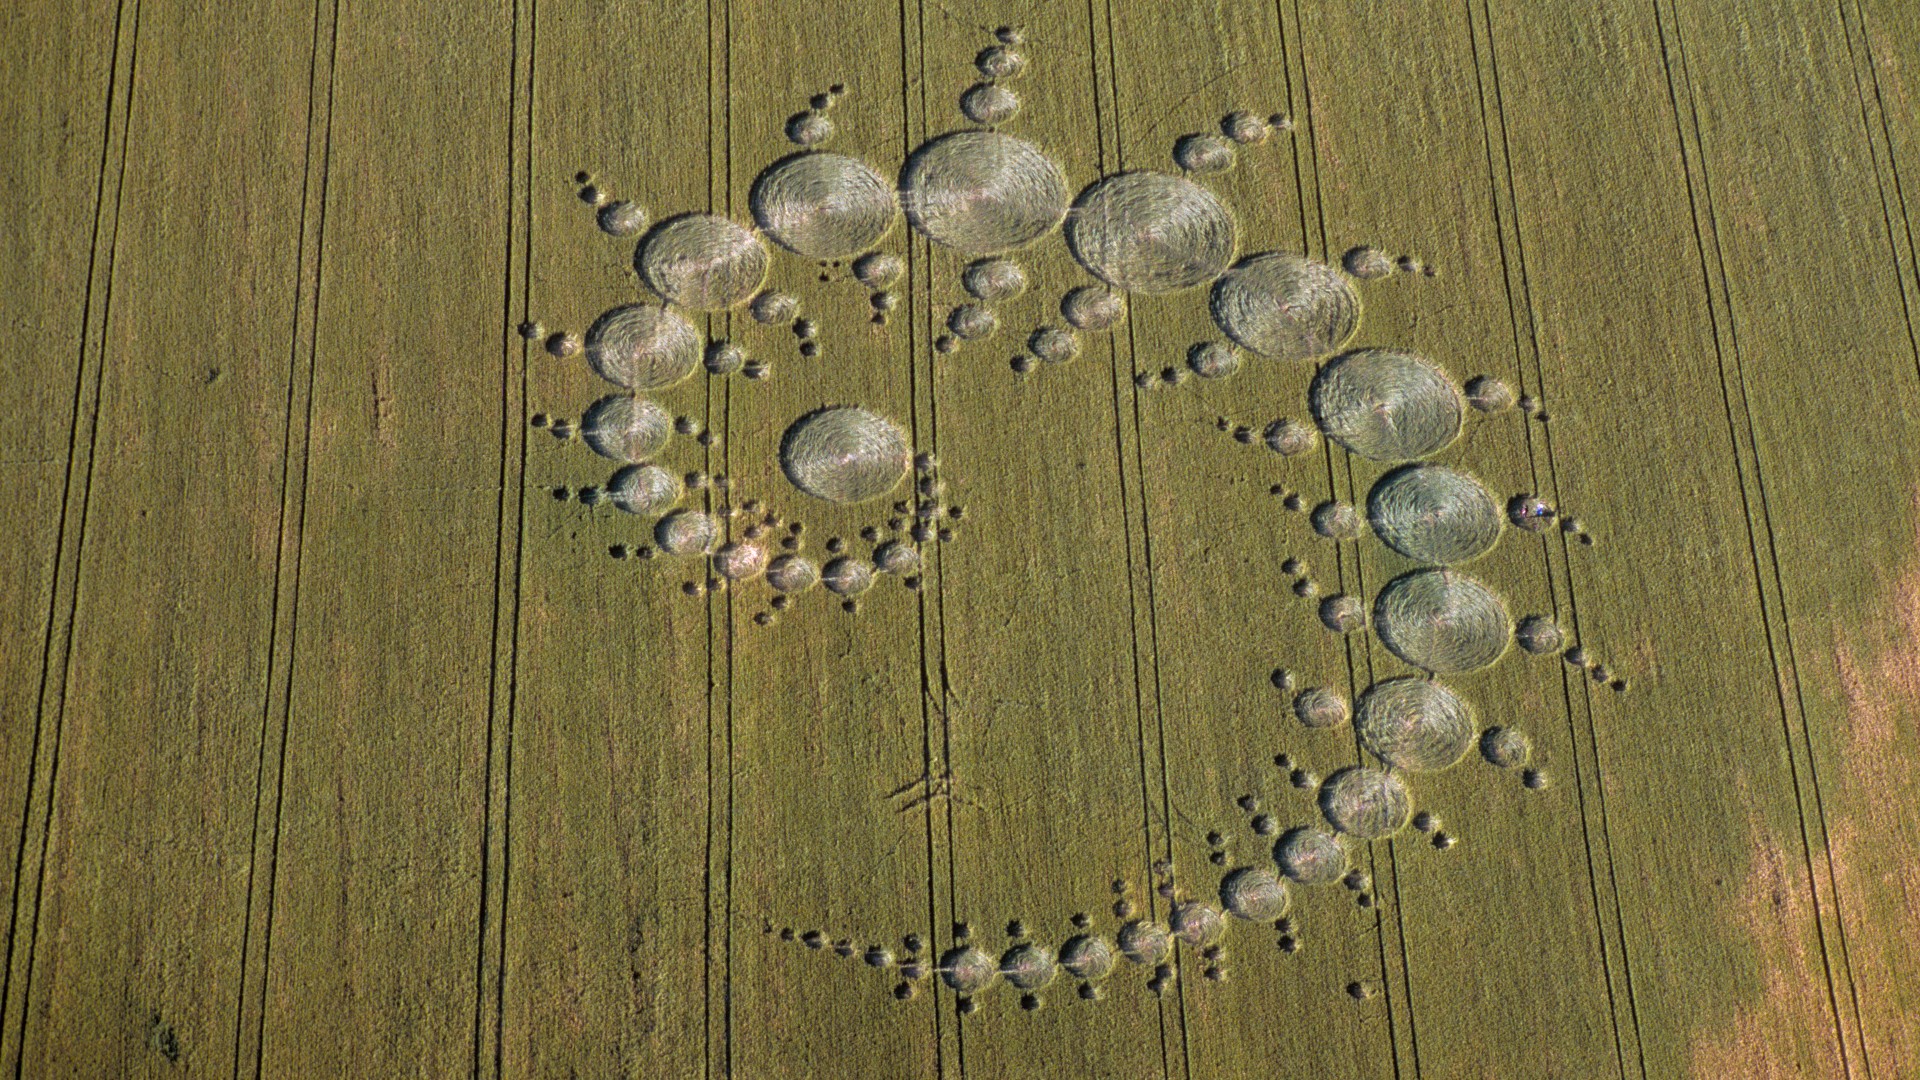 The Crop Circle which appeared at Stonehenge in 1996